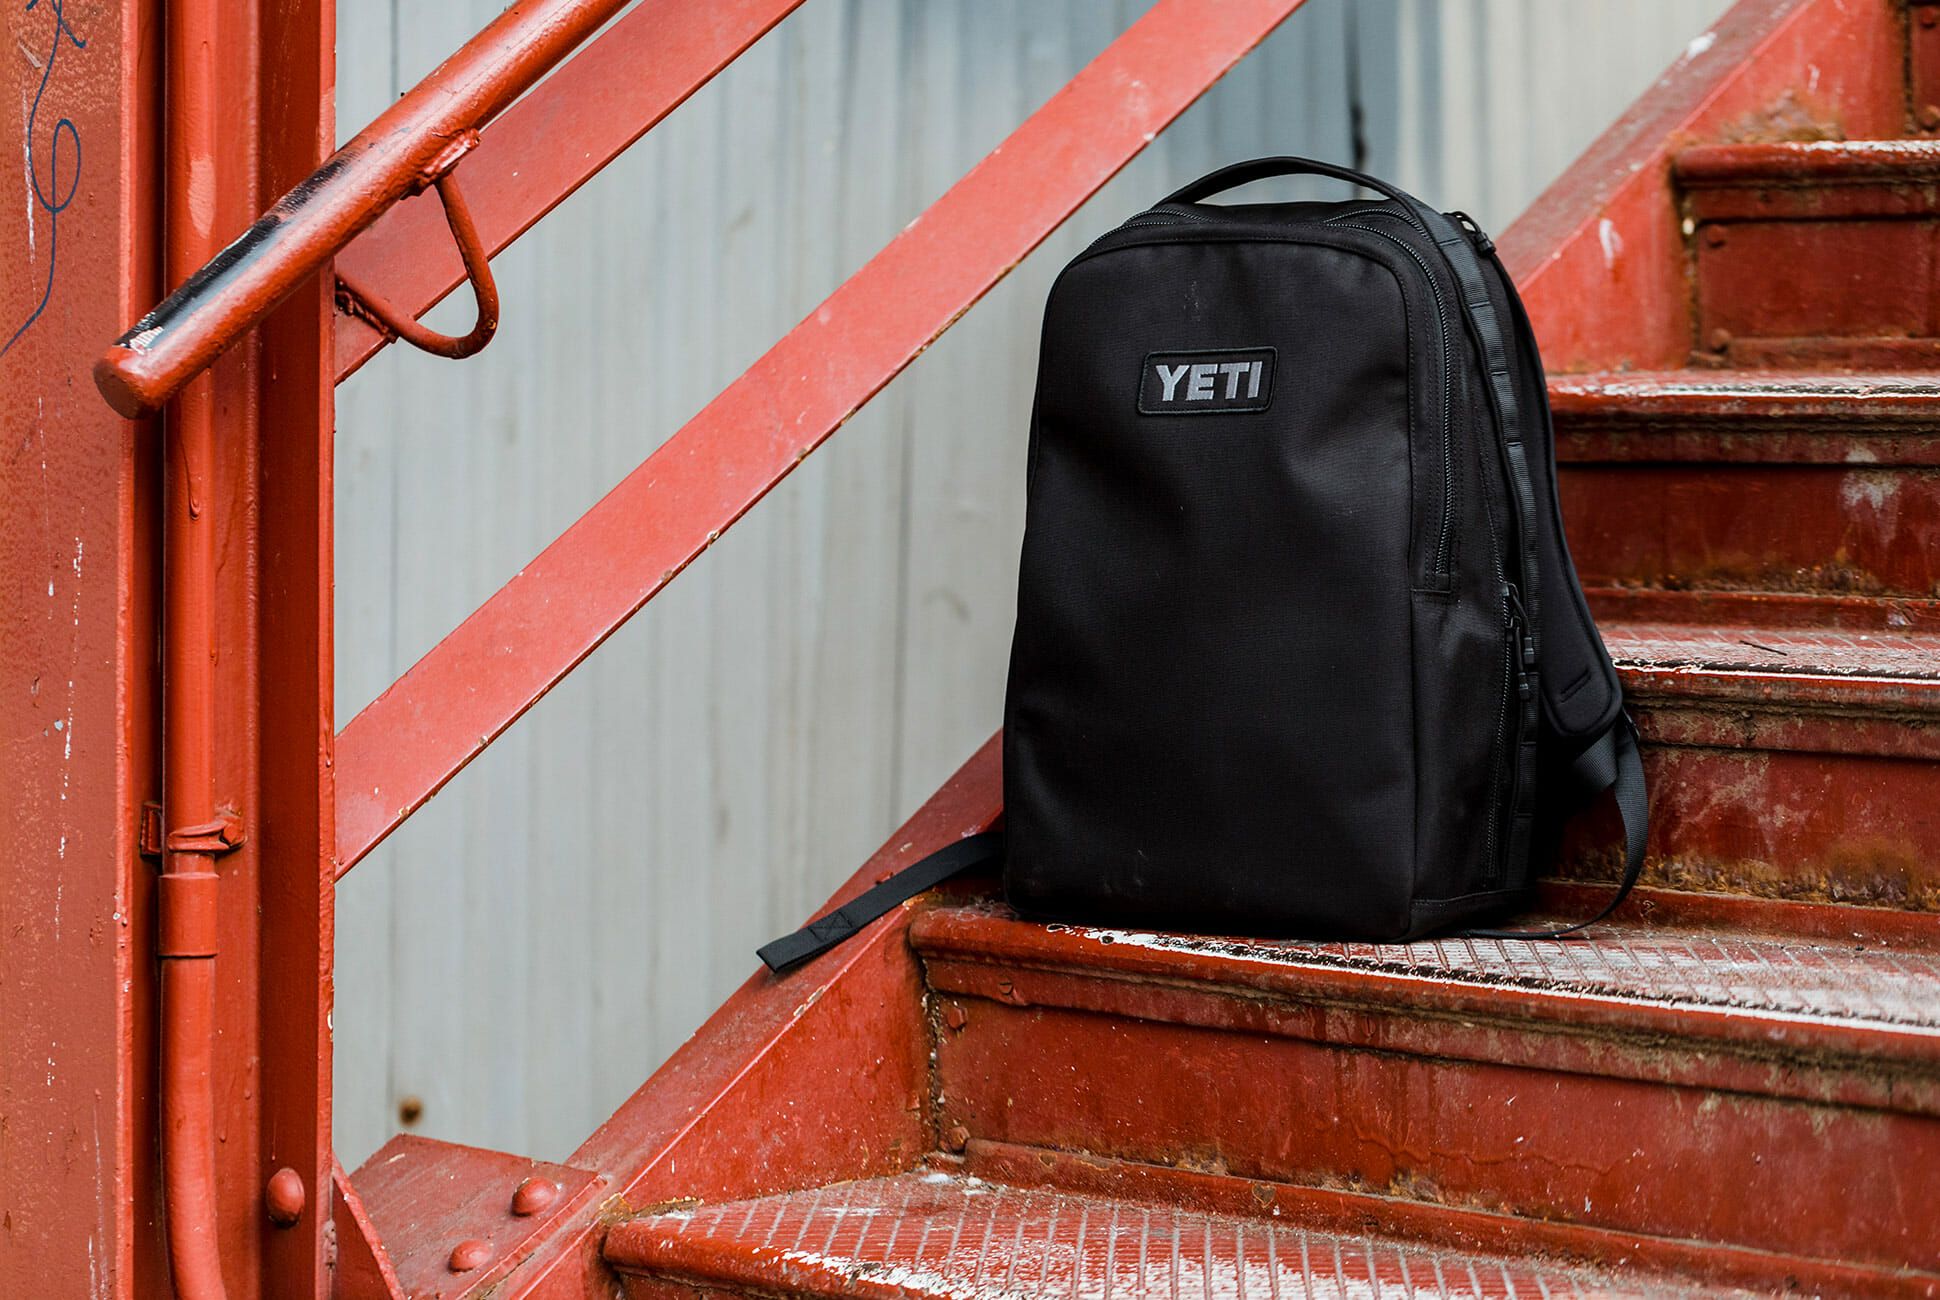 YETI® Releases New Premium Bags Collection Designed for Both Everyday Use &  Epic Adventures